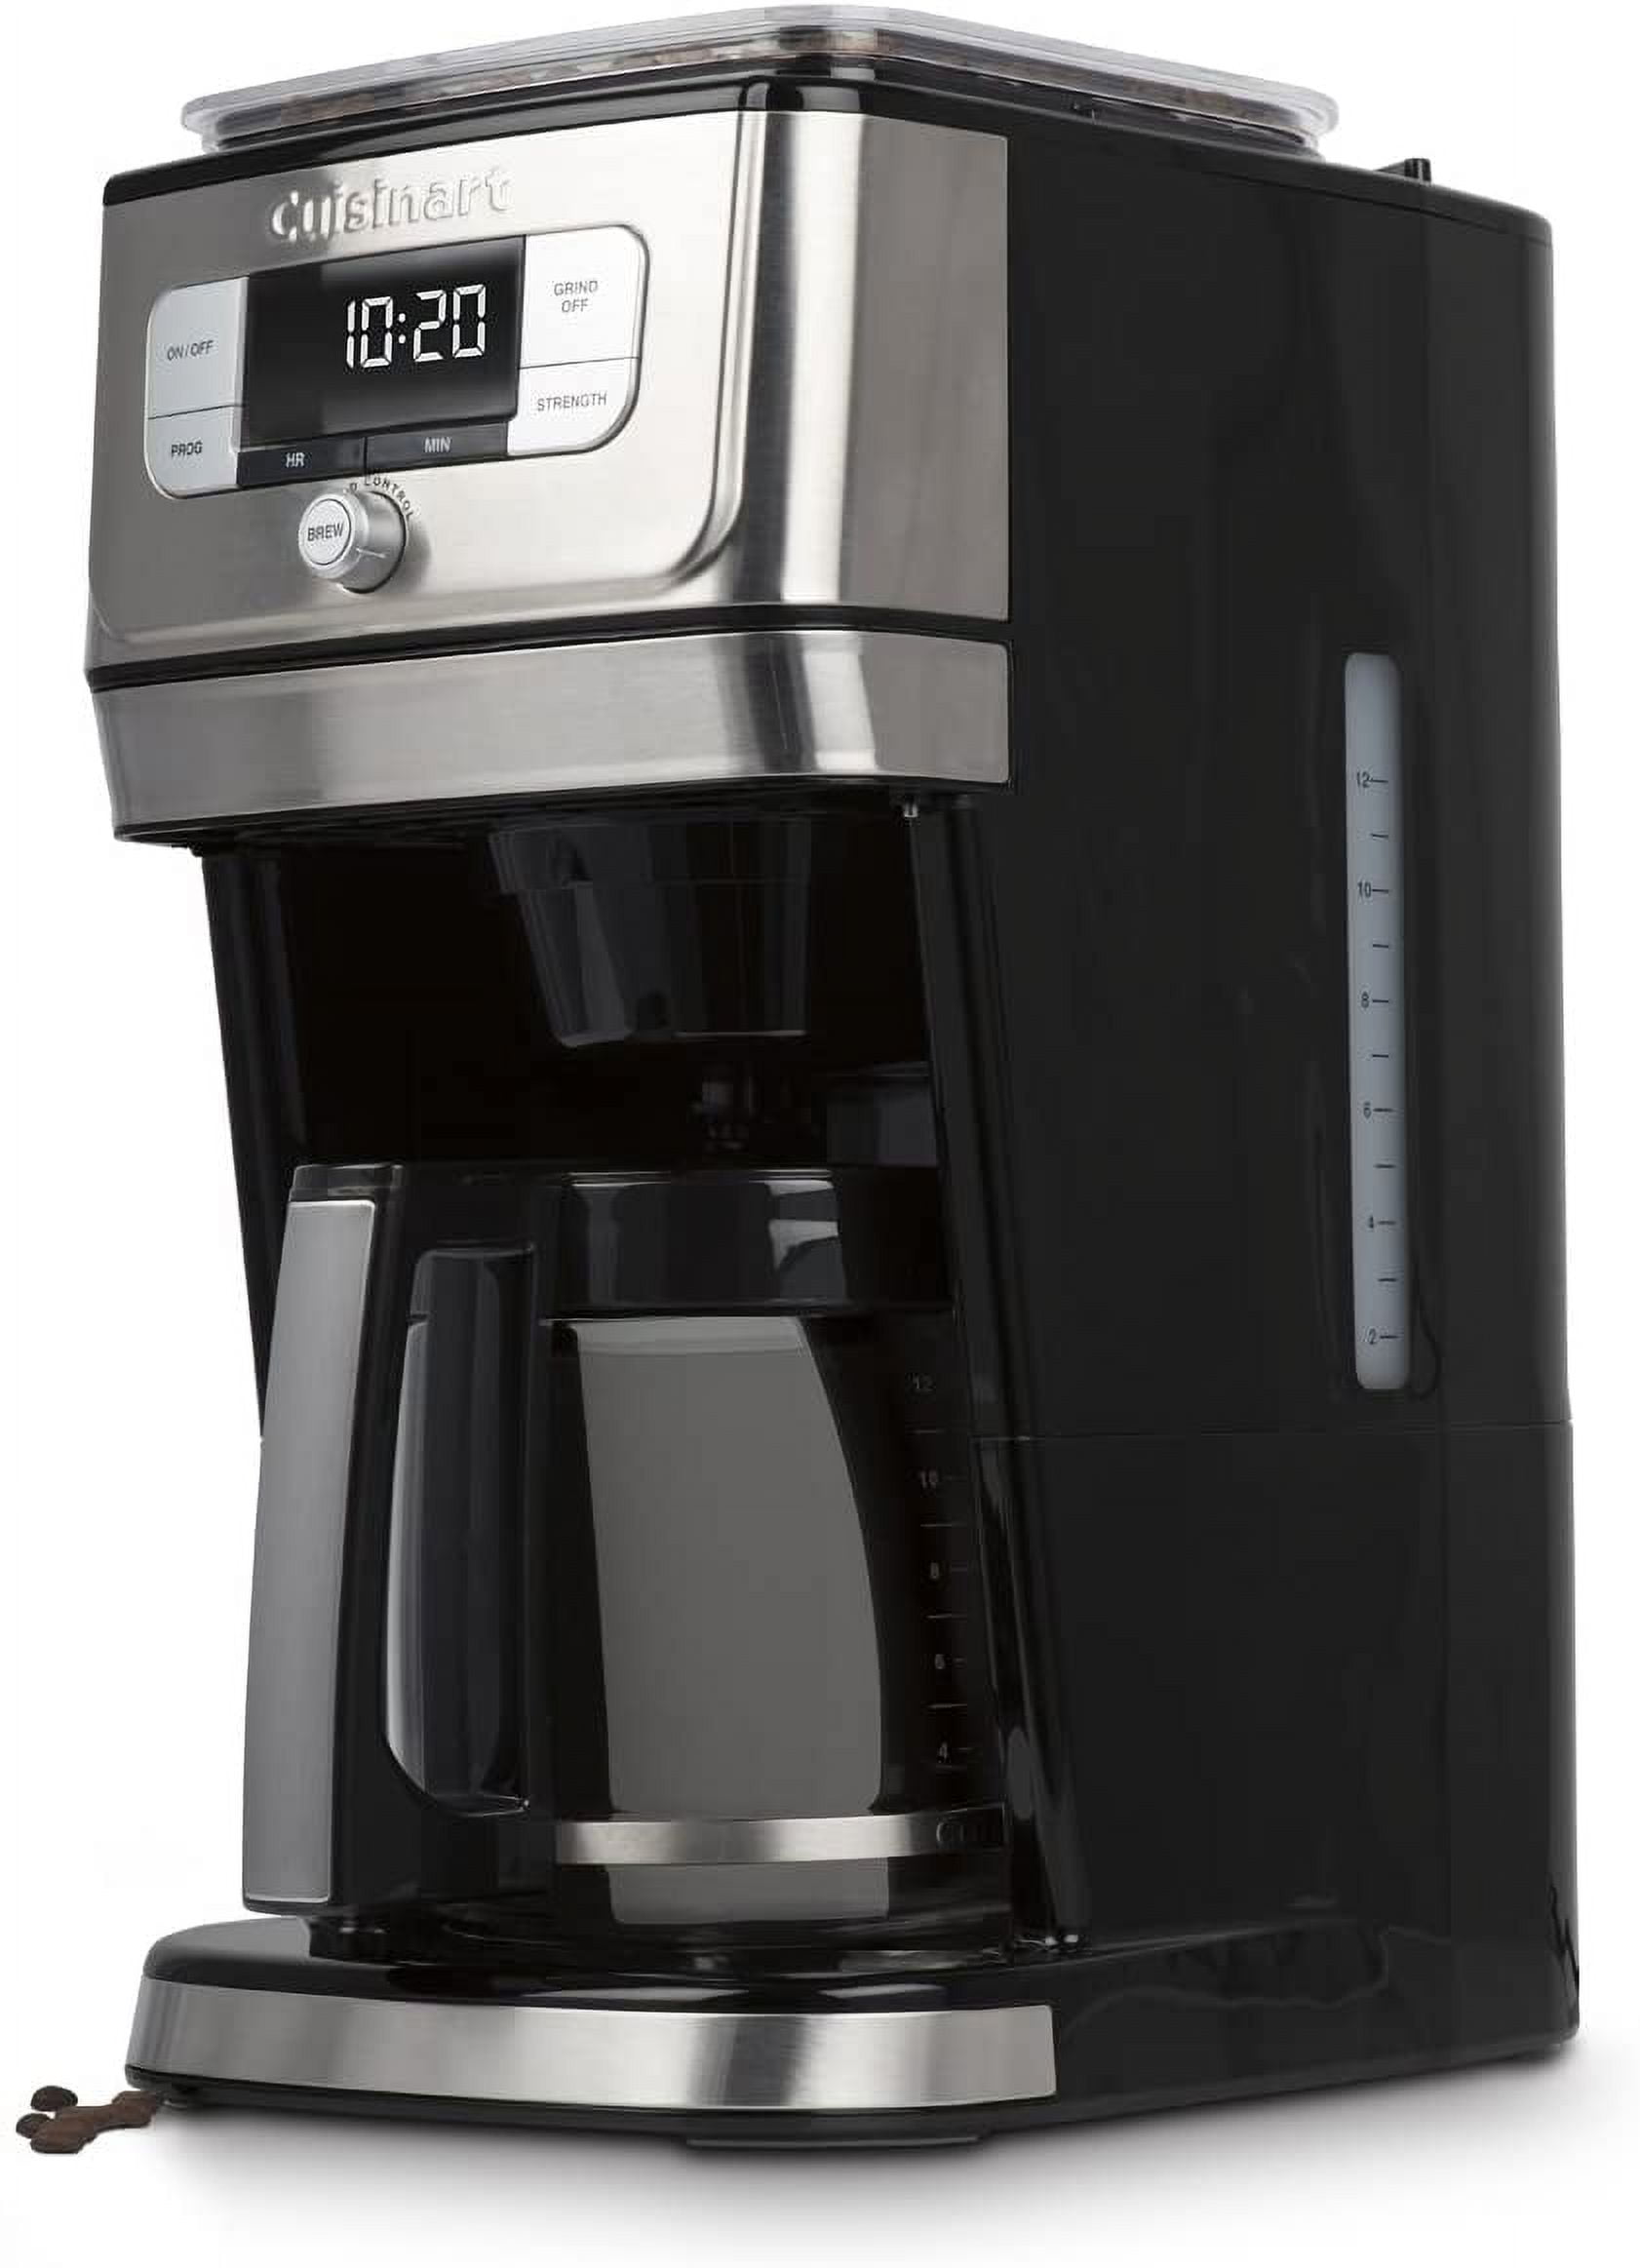 Cuisinart Burr Grind & Brew 12 Cup Coffeemaker DGB-1400BCPC New Sealed!